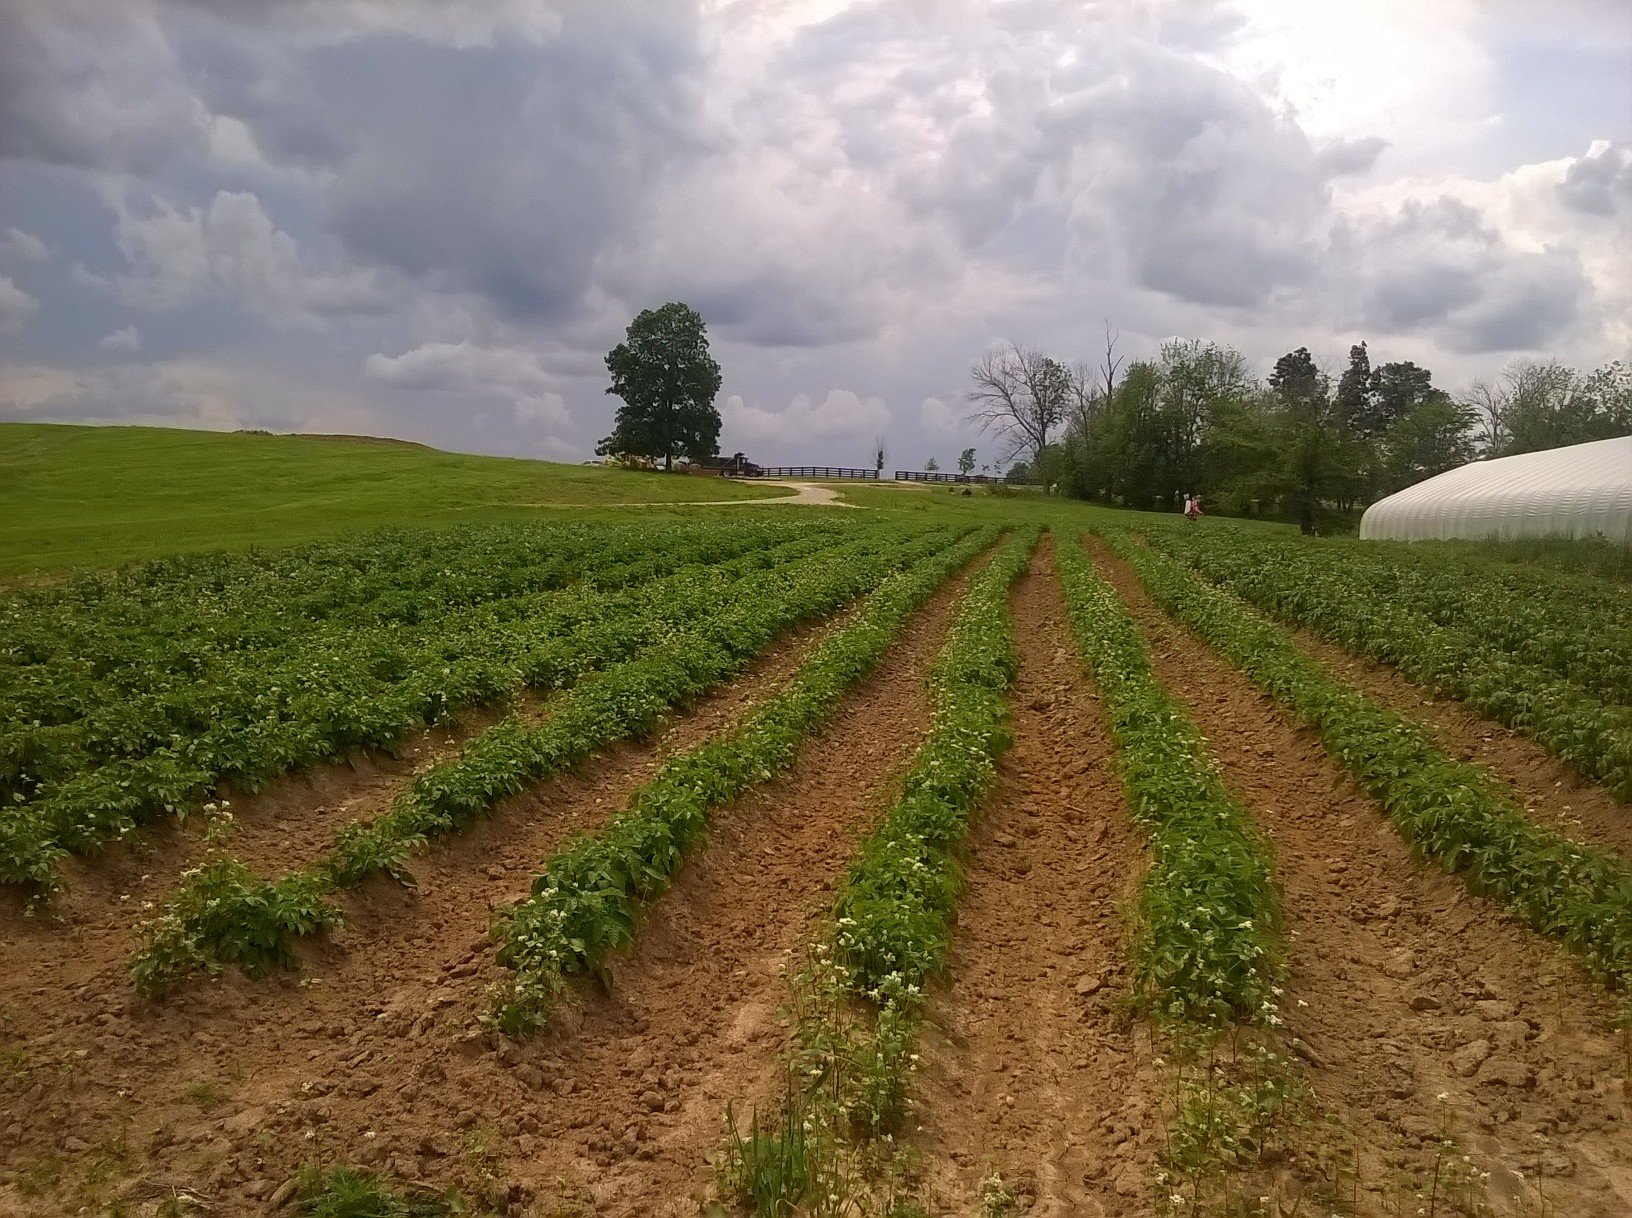 Previous Happening: Farm Happenings for May 21, 2019